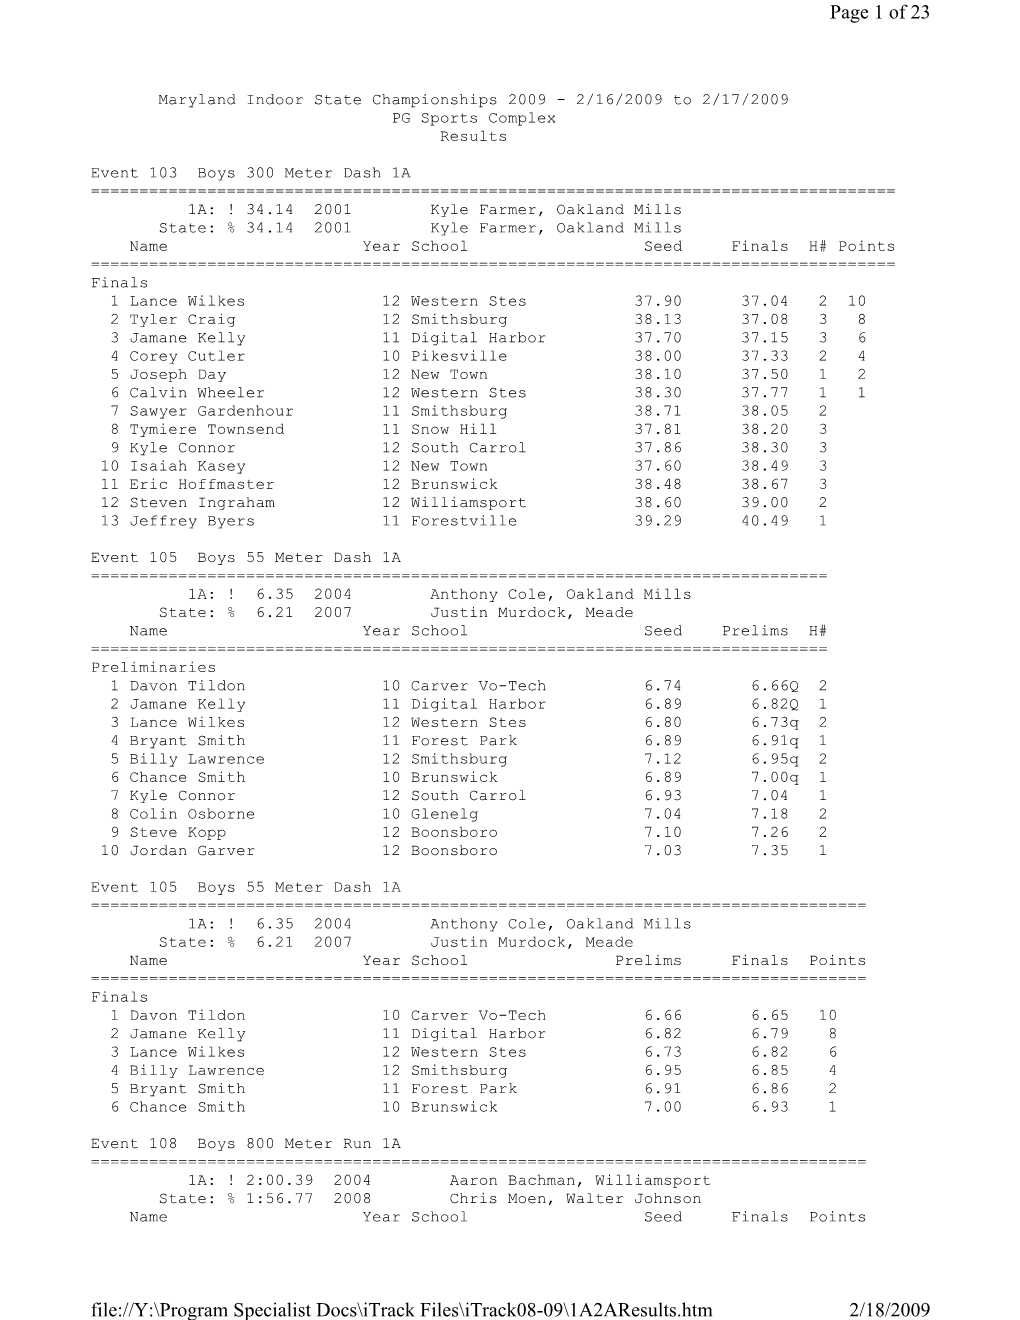 Class 1A and Class 2A Results